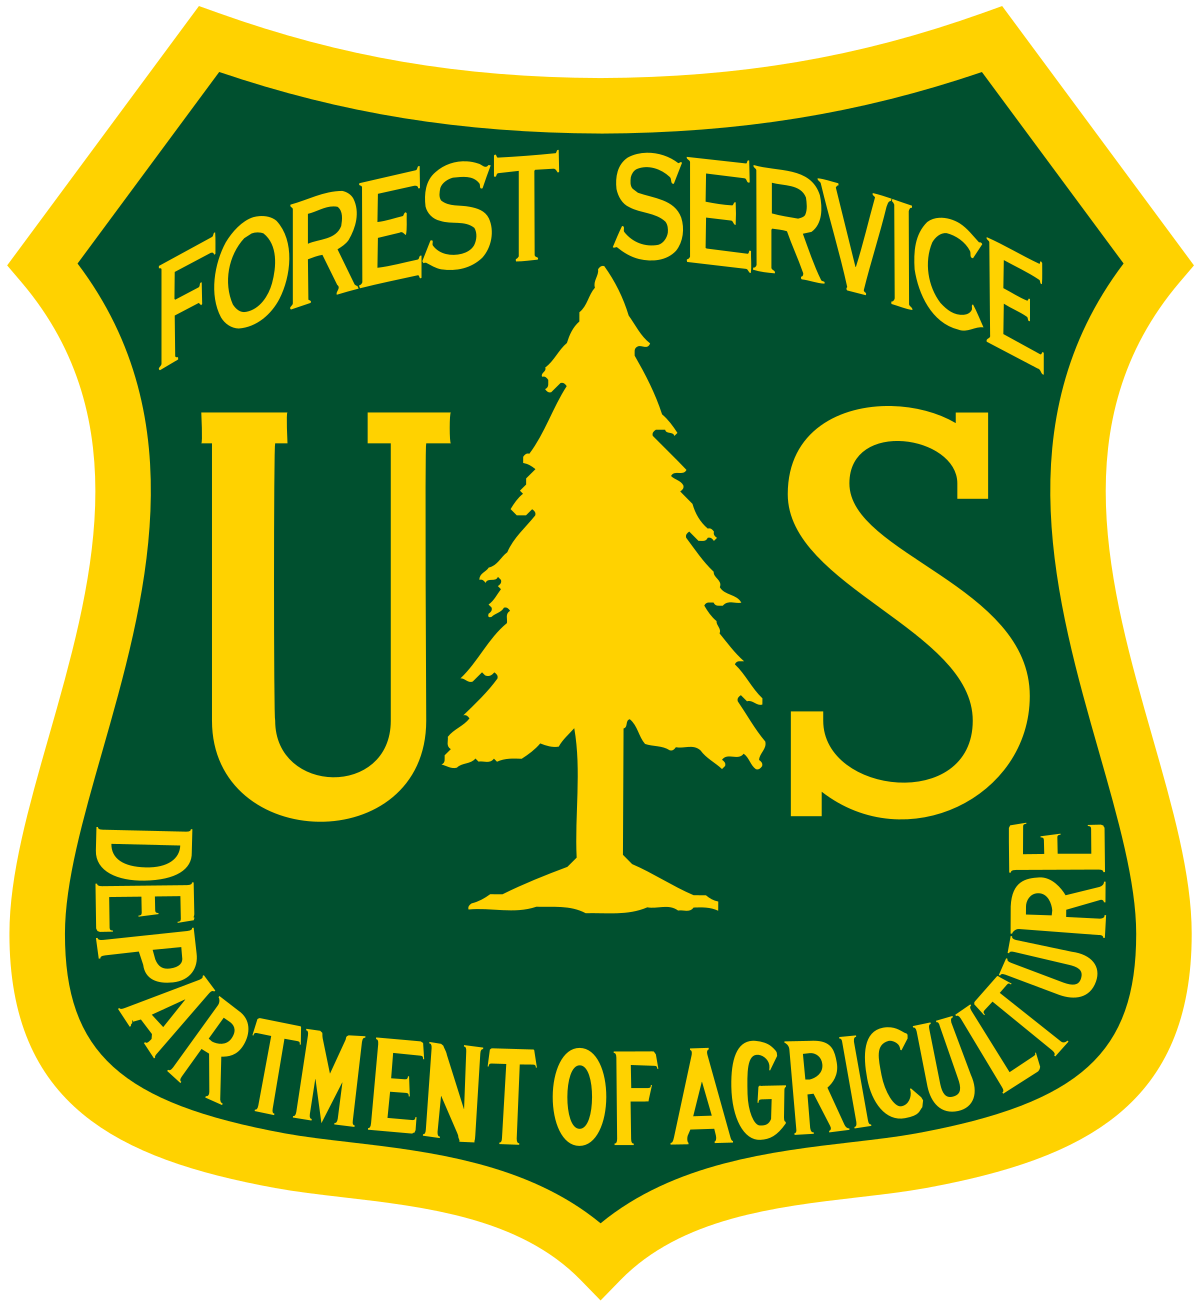 U.S. Forest Service emblem - a yellow shield with a greed field depicting at the top, FOREST SERVICE; in the center, the letter 'U', an silhouette of a tree, and the letter 'S'; at the bottom DEPARTMENT OF AGRICULTURE wrapping around the bottom of the shield shape